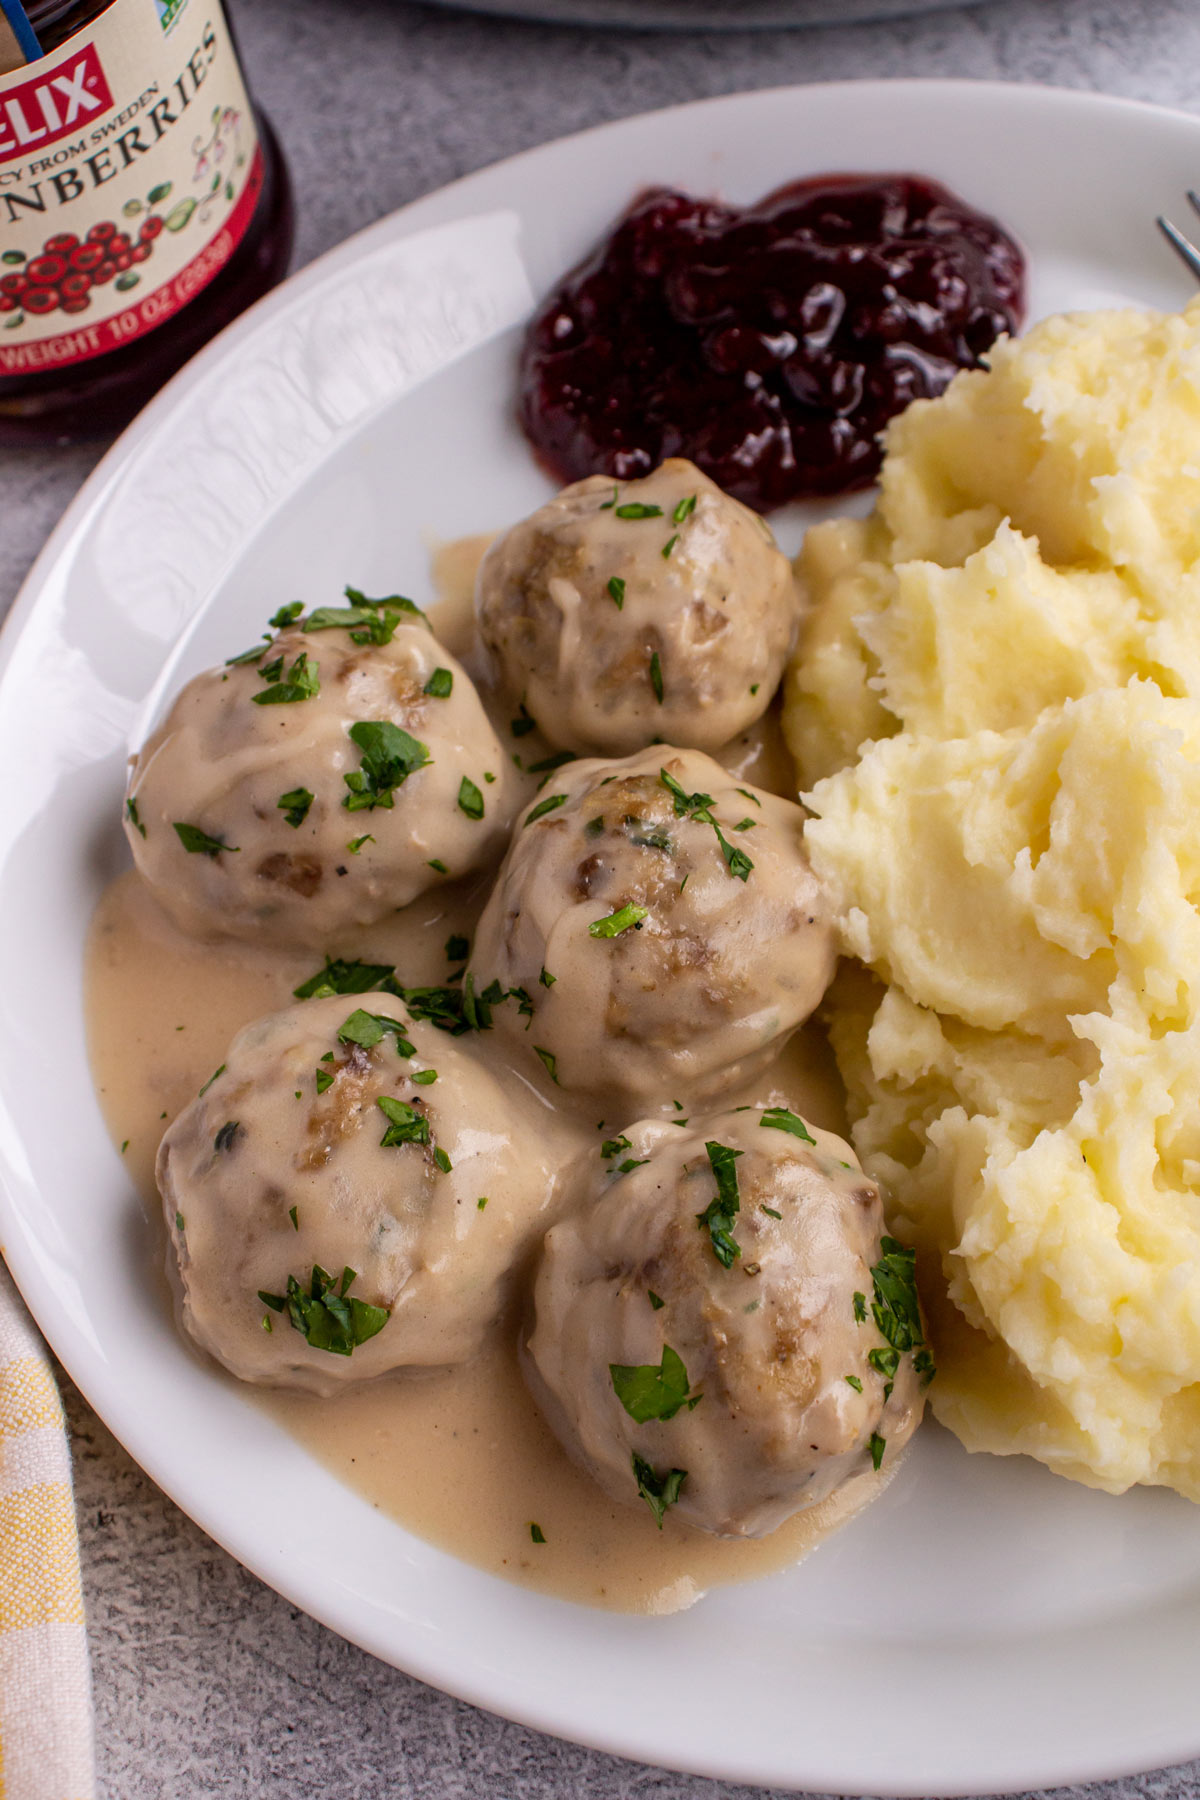 Five Swedish meatballs in gravy on a white plate with mashed potatoes and lingonberry preserves.